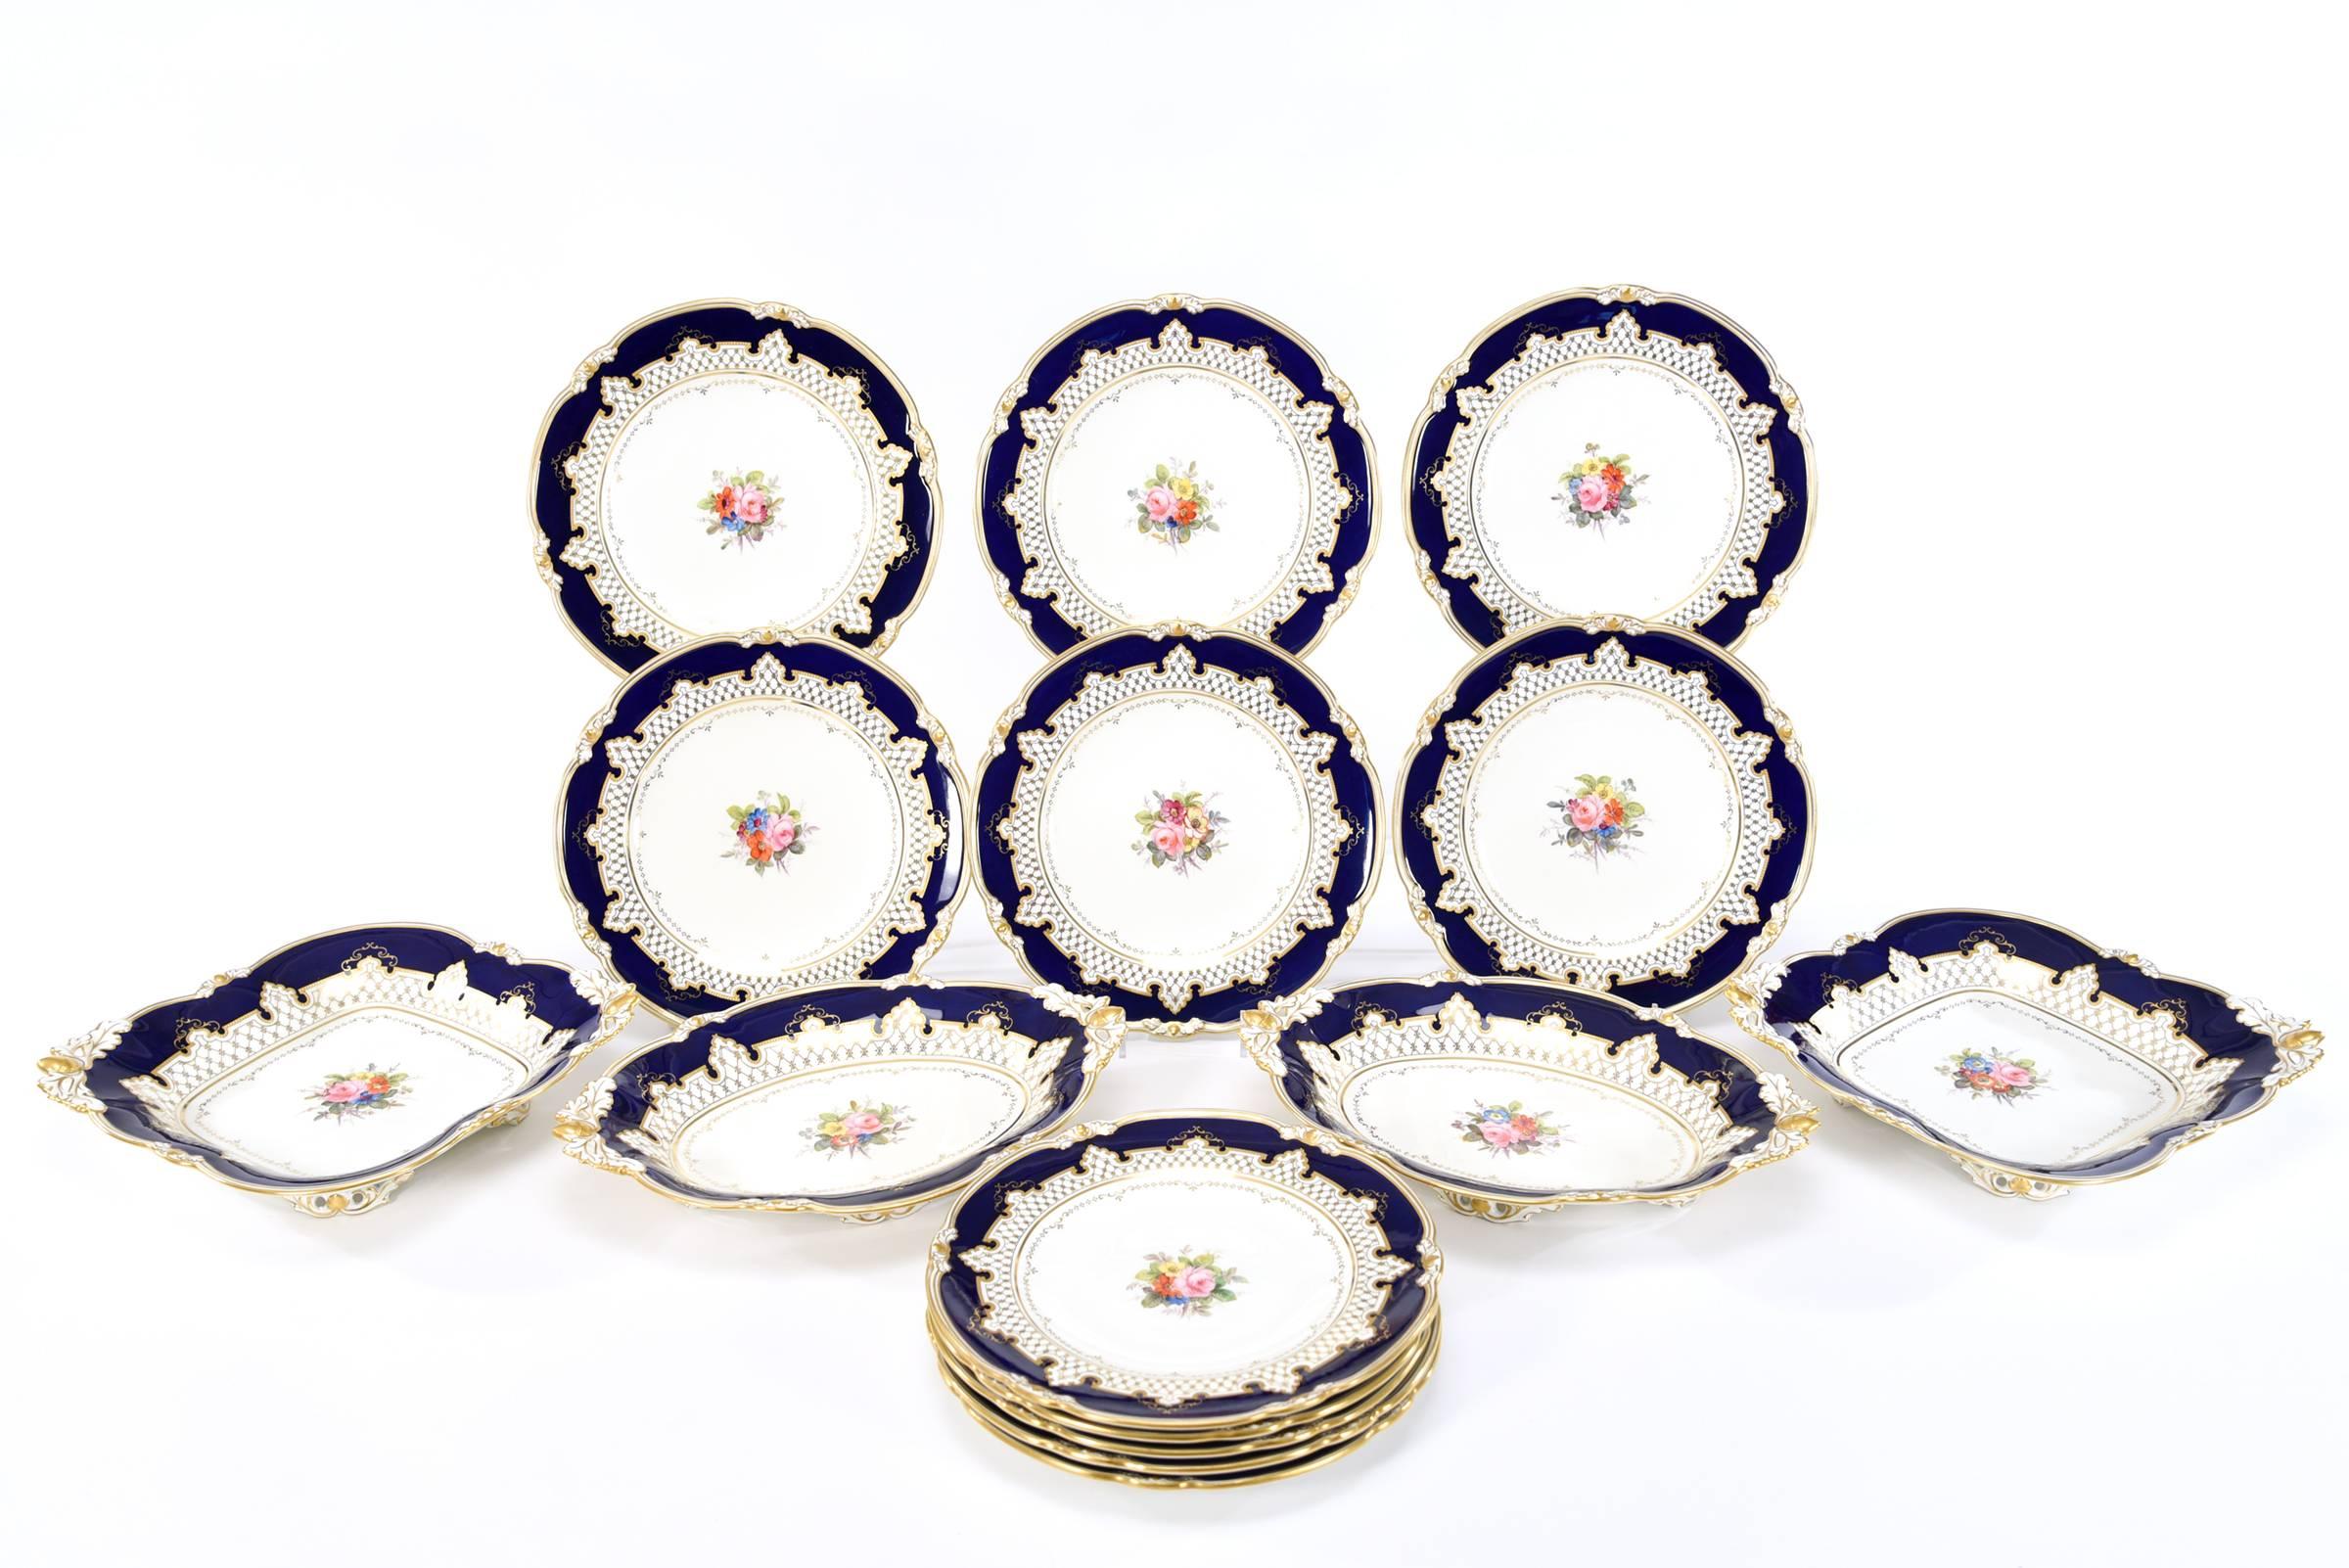 This 15 piece Royal Crown Derby dessert set consists of 11 9